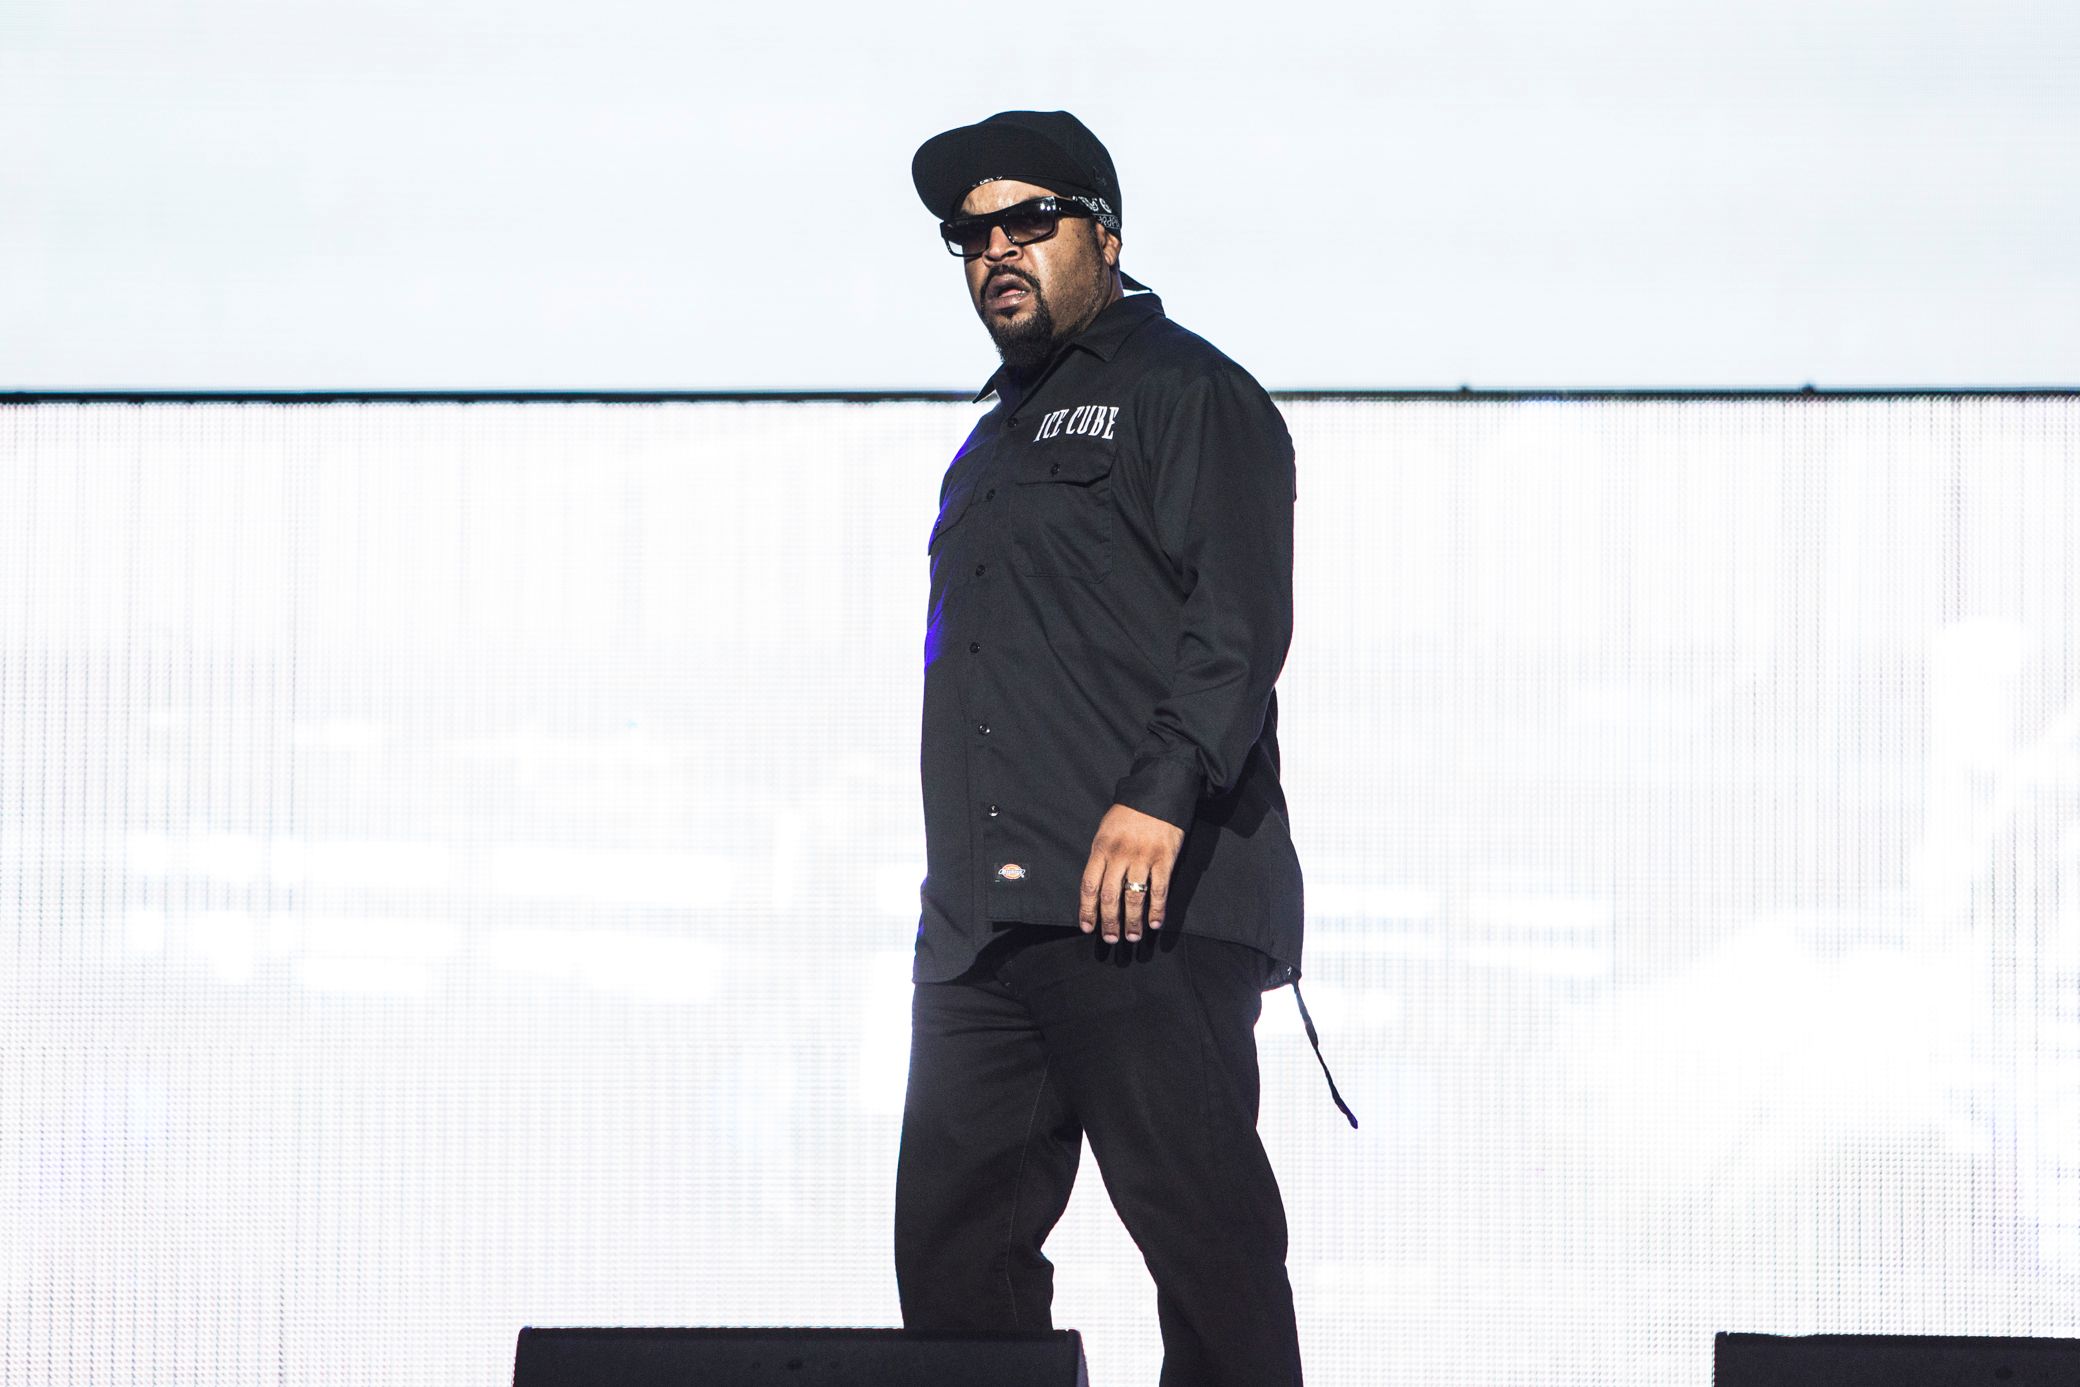 ice cube 7 KAABOO Del Mar Succeeds at Being a Festival for Everyone